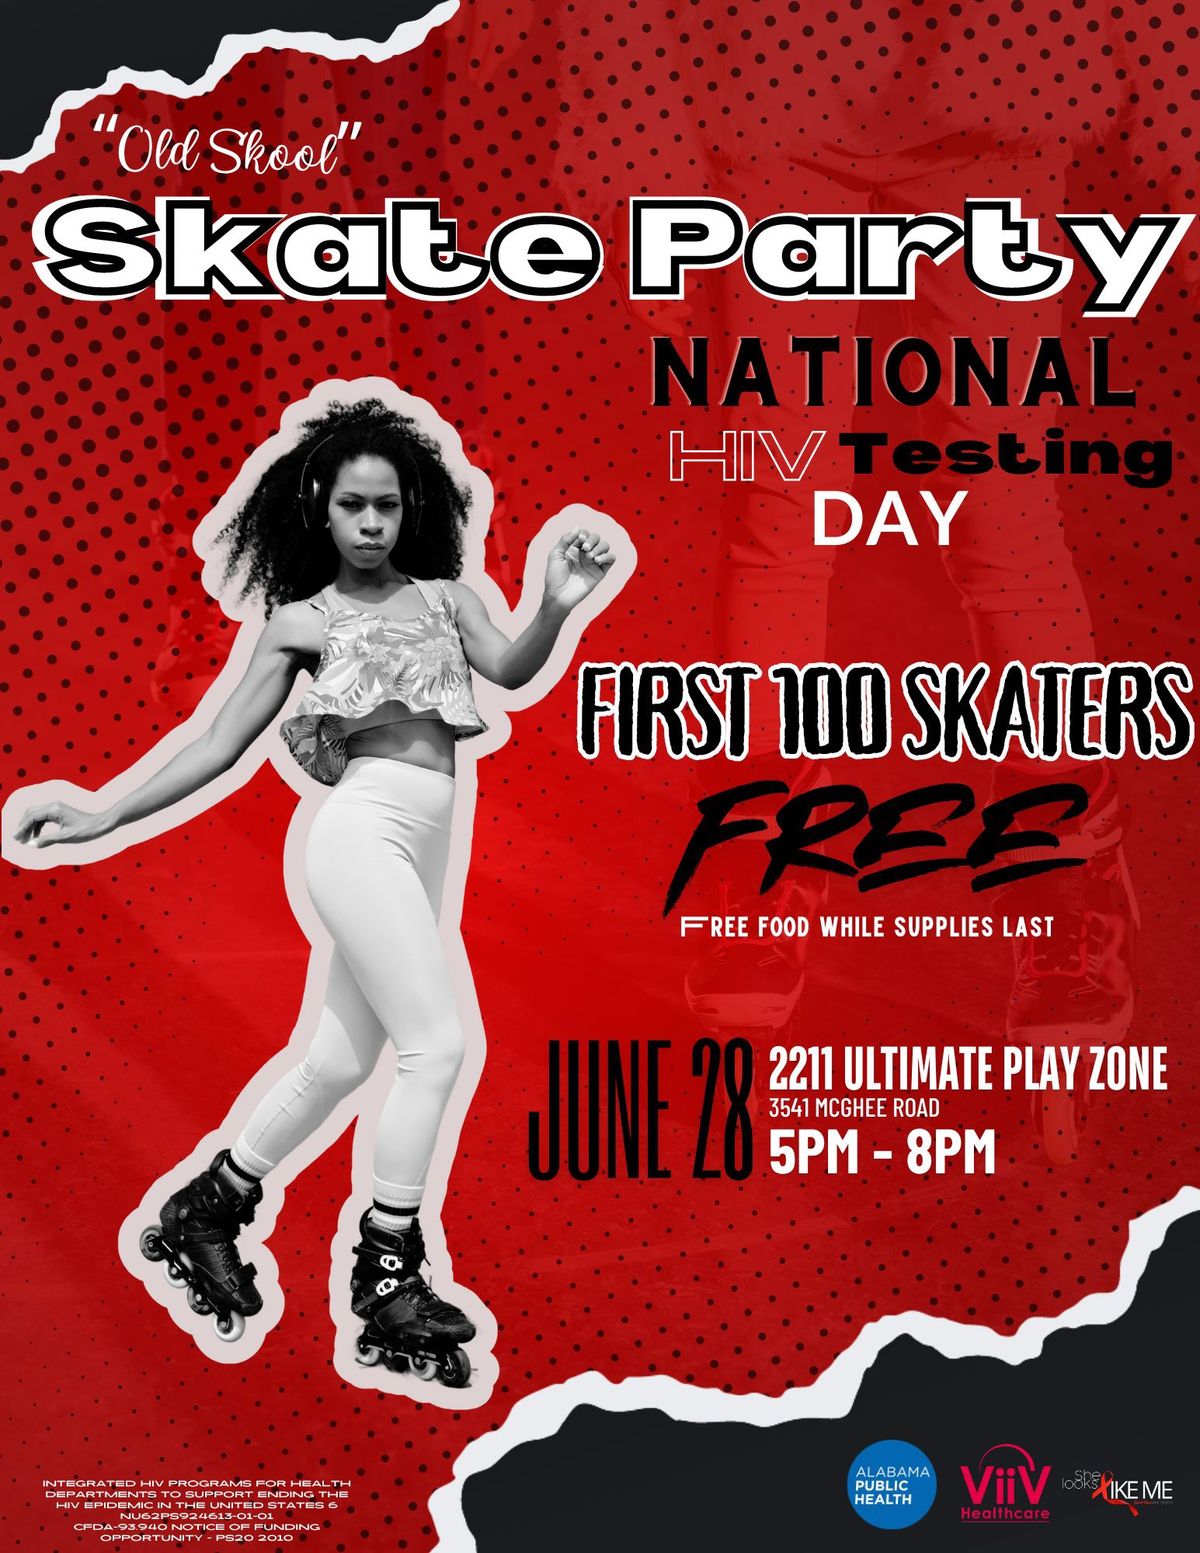 Skate for Free on National HIV Testing Day!